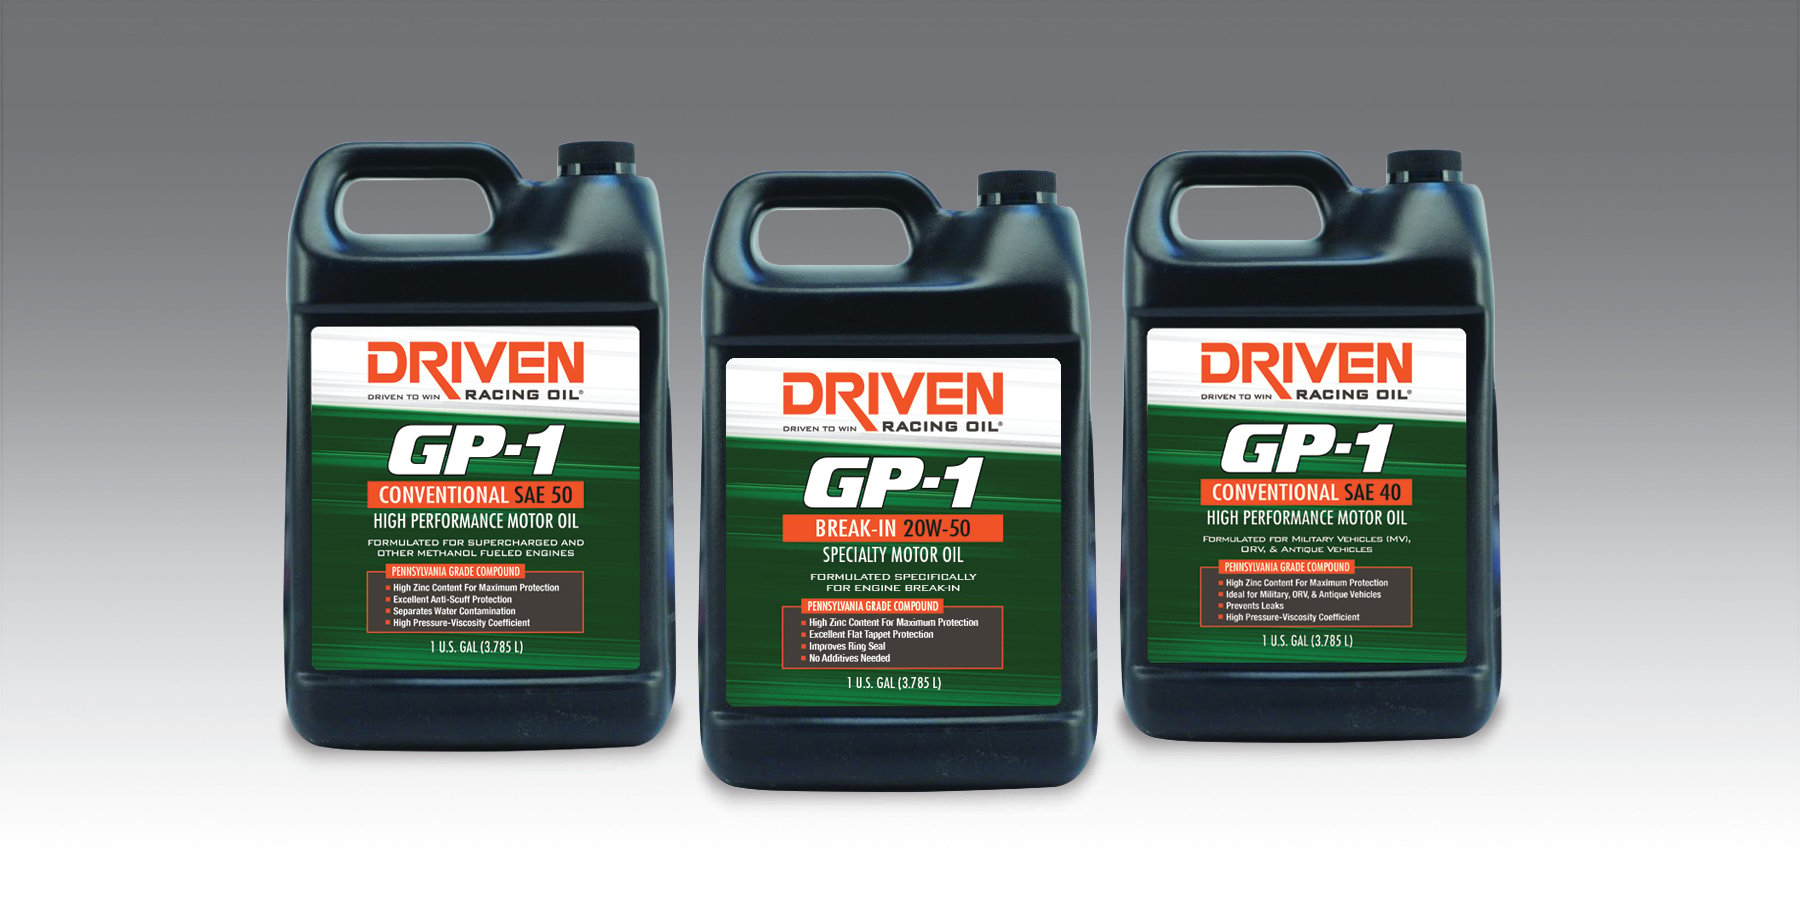 A New Driven Oil That Is Safe For Vintage And Classic Engines